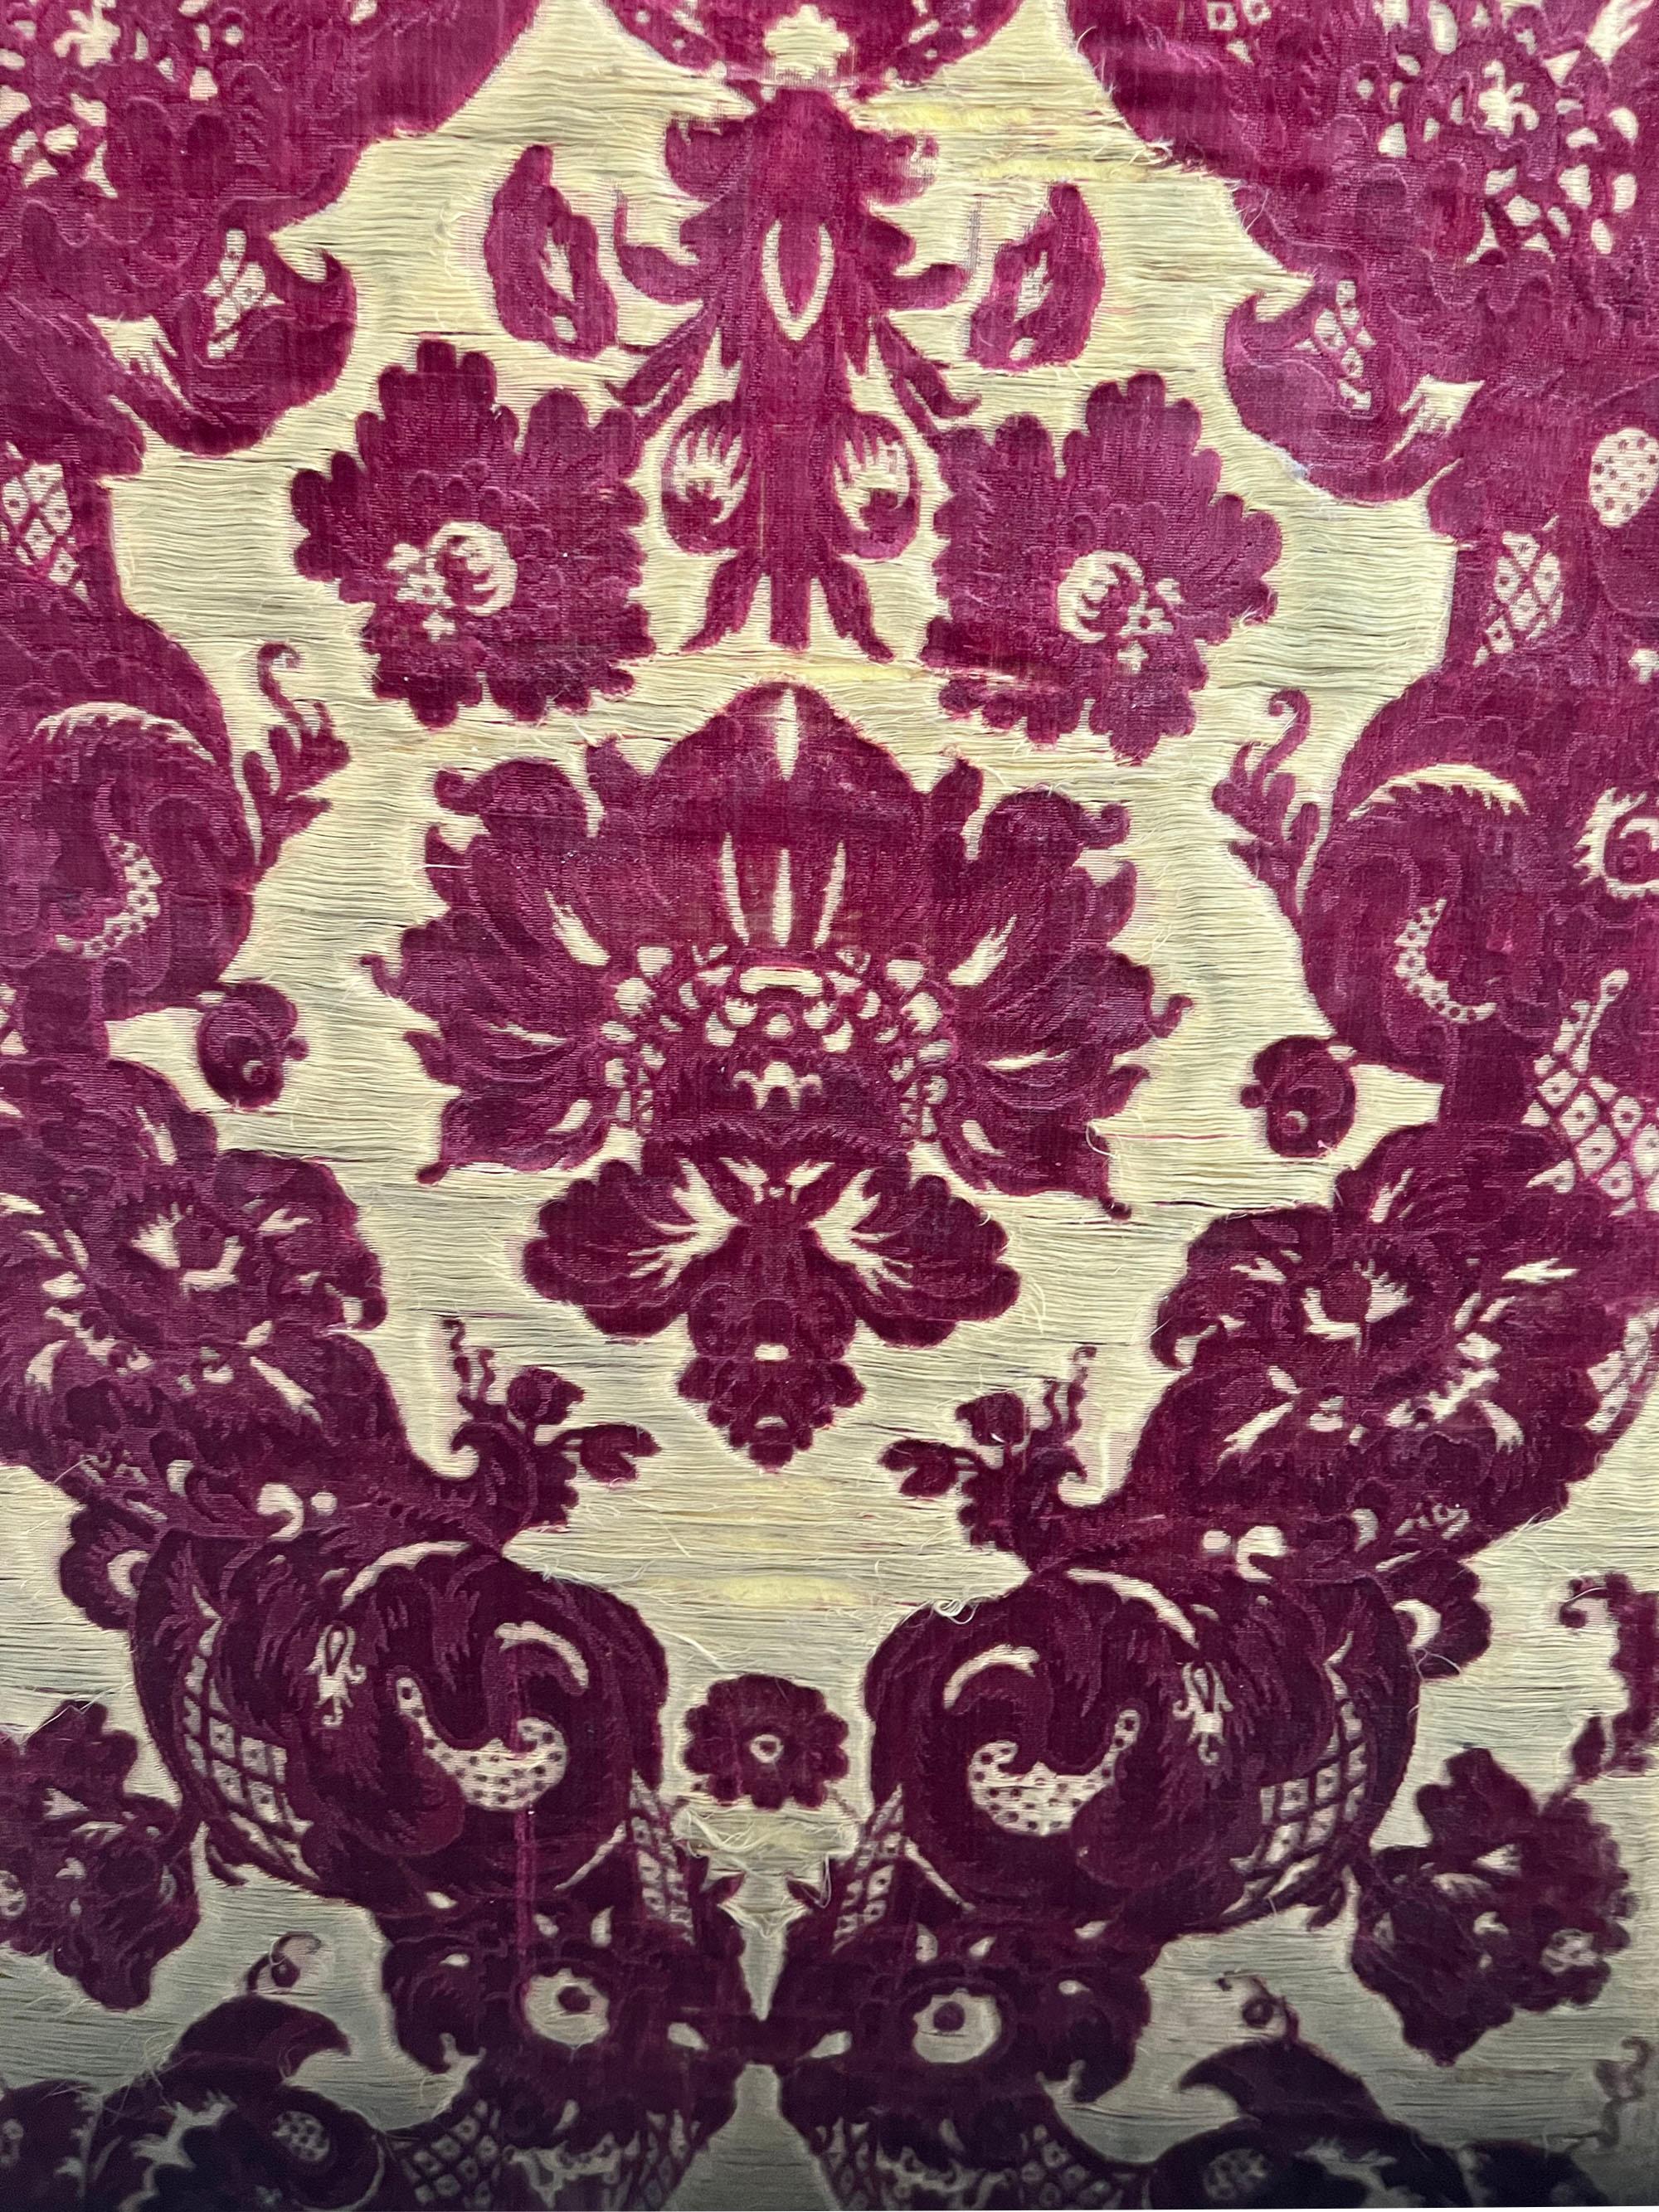 French 17th century Baroque silk damask textile 2'1 x 5'1. Going for Baroque? Everything is dramatic. Think Caravaggesque paintings. Sculptures carved furniture. Everything is designed to impress. This textile, originally a section of a longer bolt,